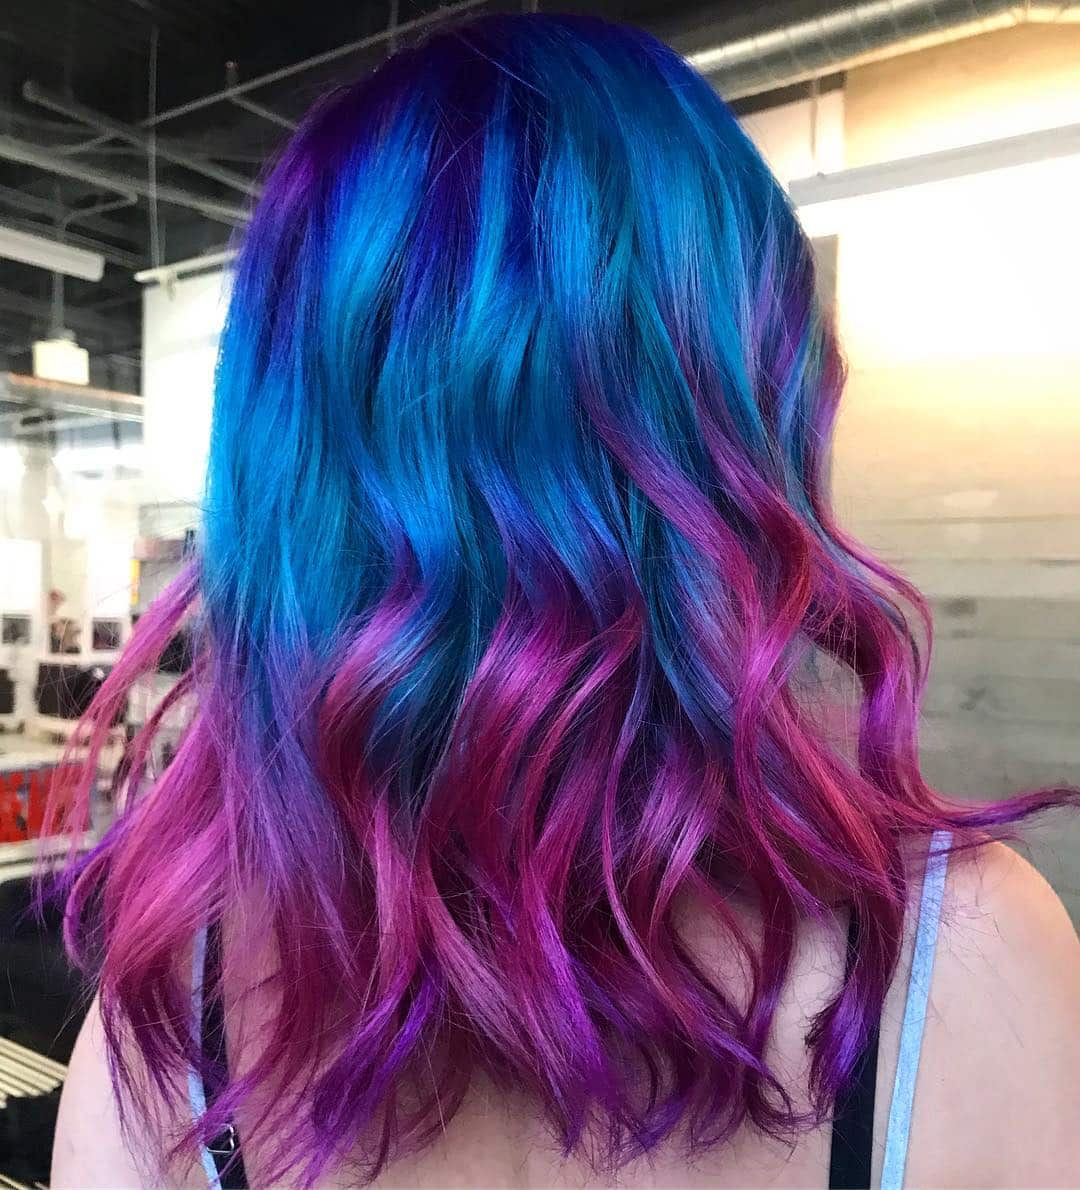 25 Magenta Hair Color Ideas for Women Trending Right Now